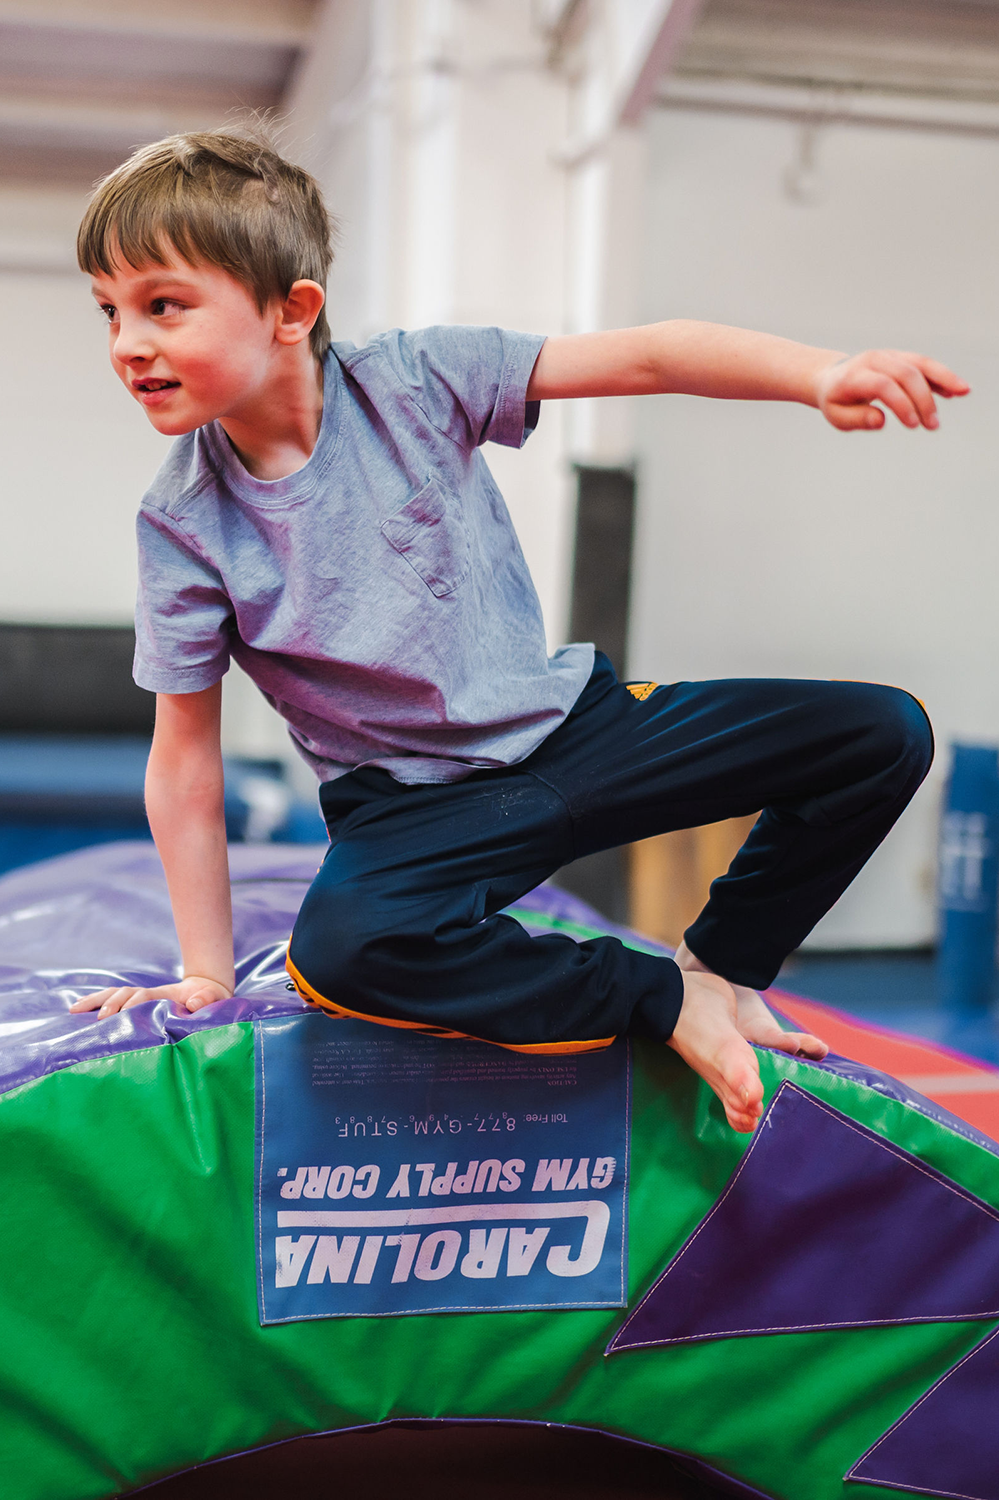 A young boy leaps off the edge of a soft play tumbling structure inside the gym.